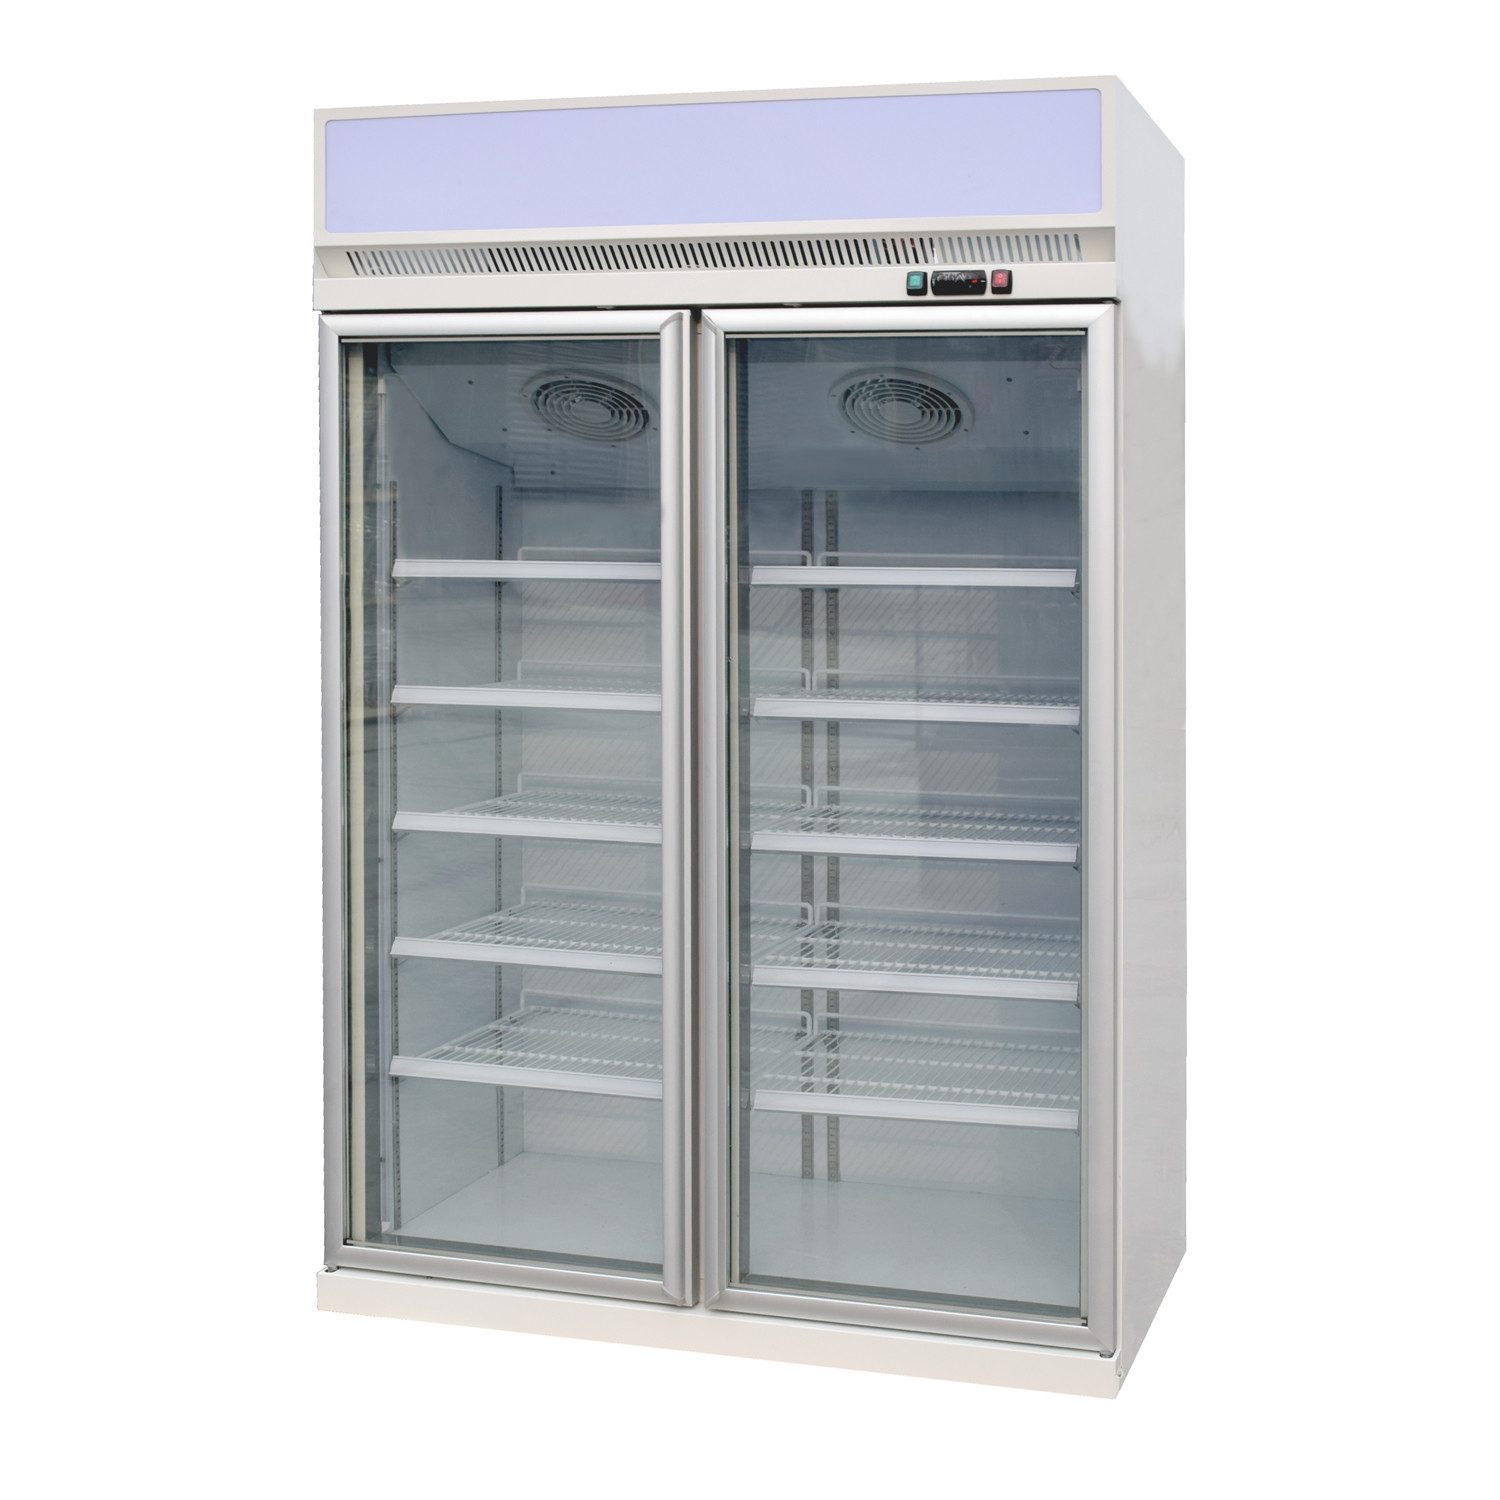 China Top Mounted Two Glass Swing Door Merchandiser Freezer with Eco friendly R290 refrigerant factory